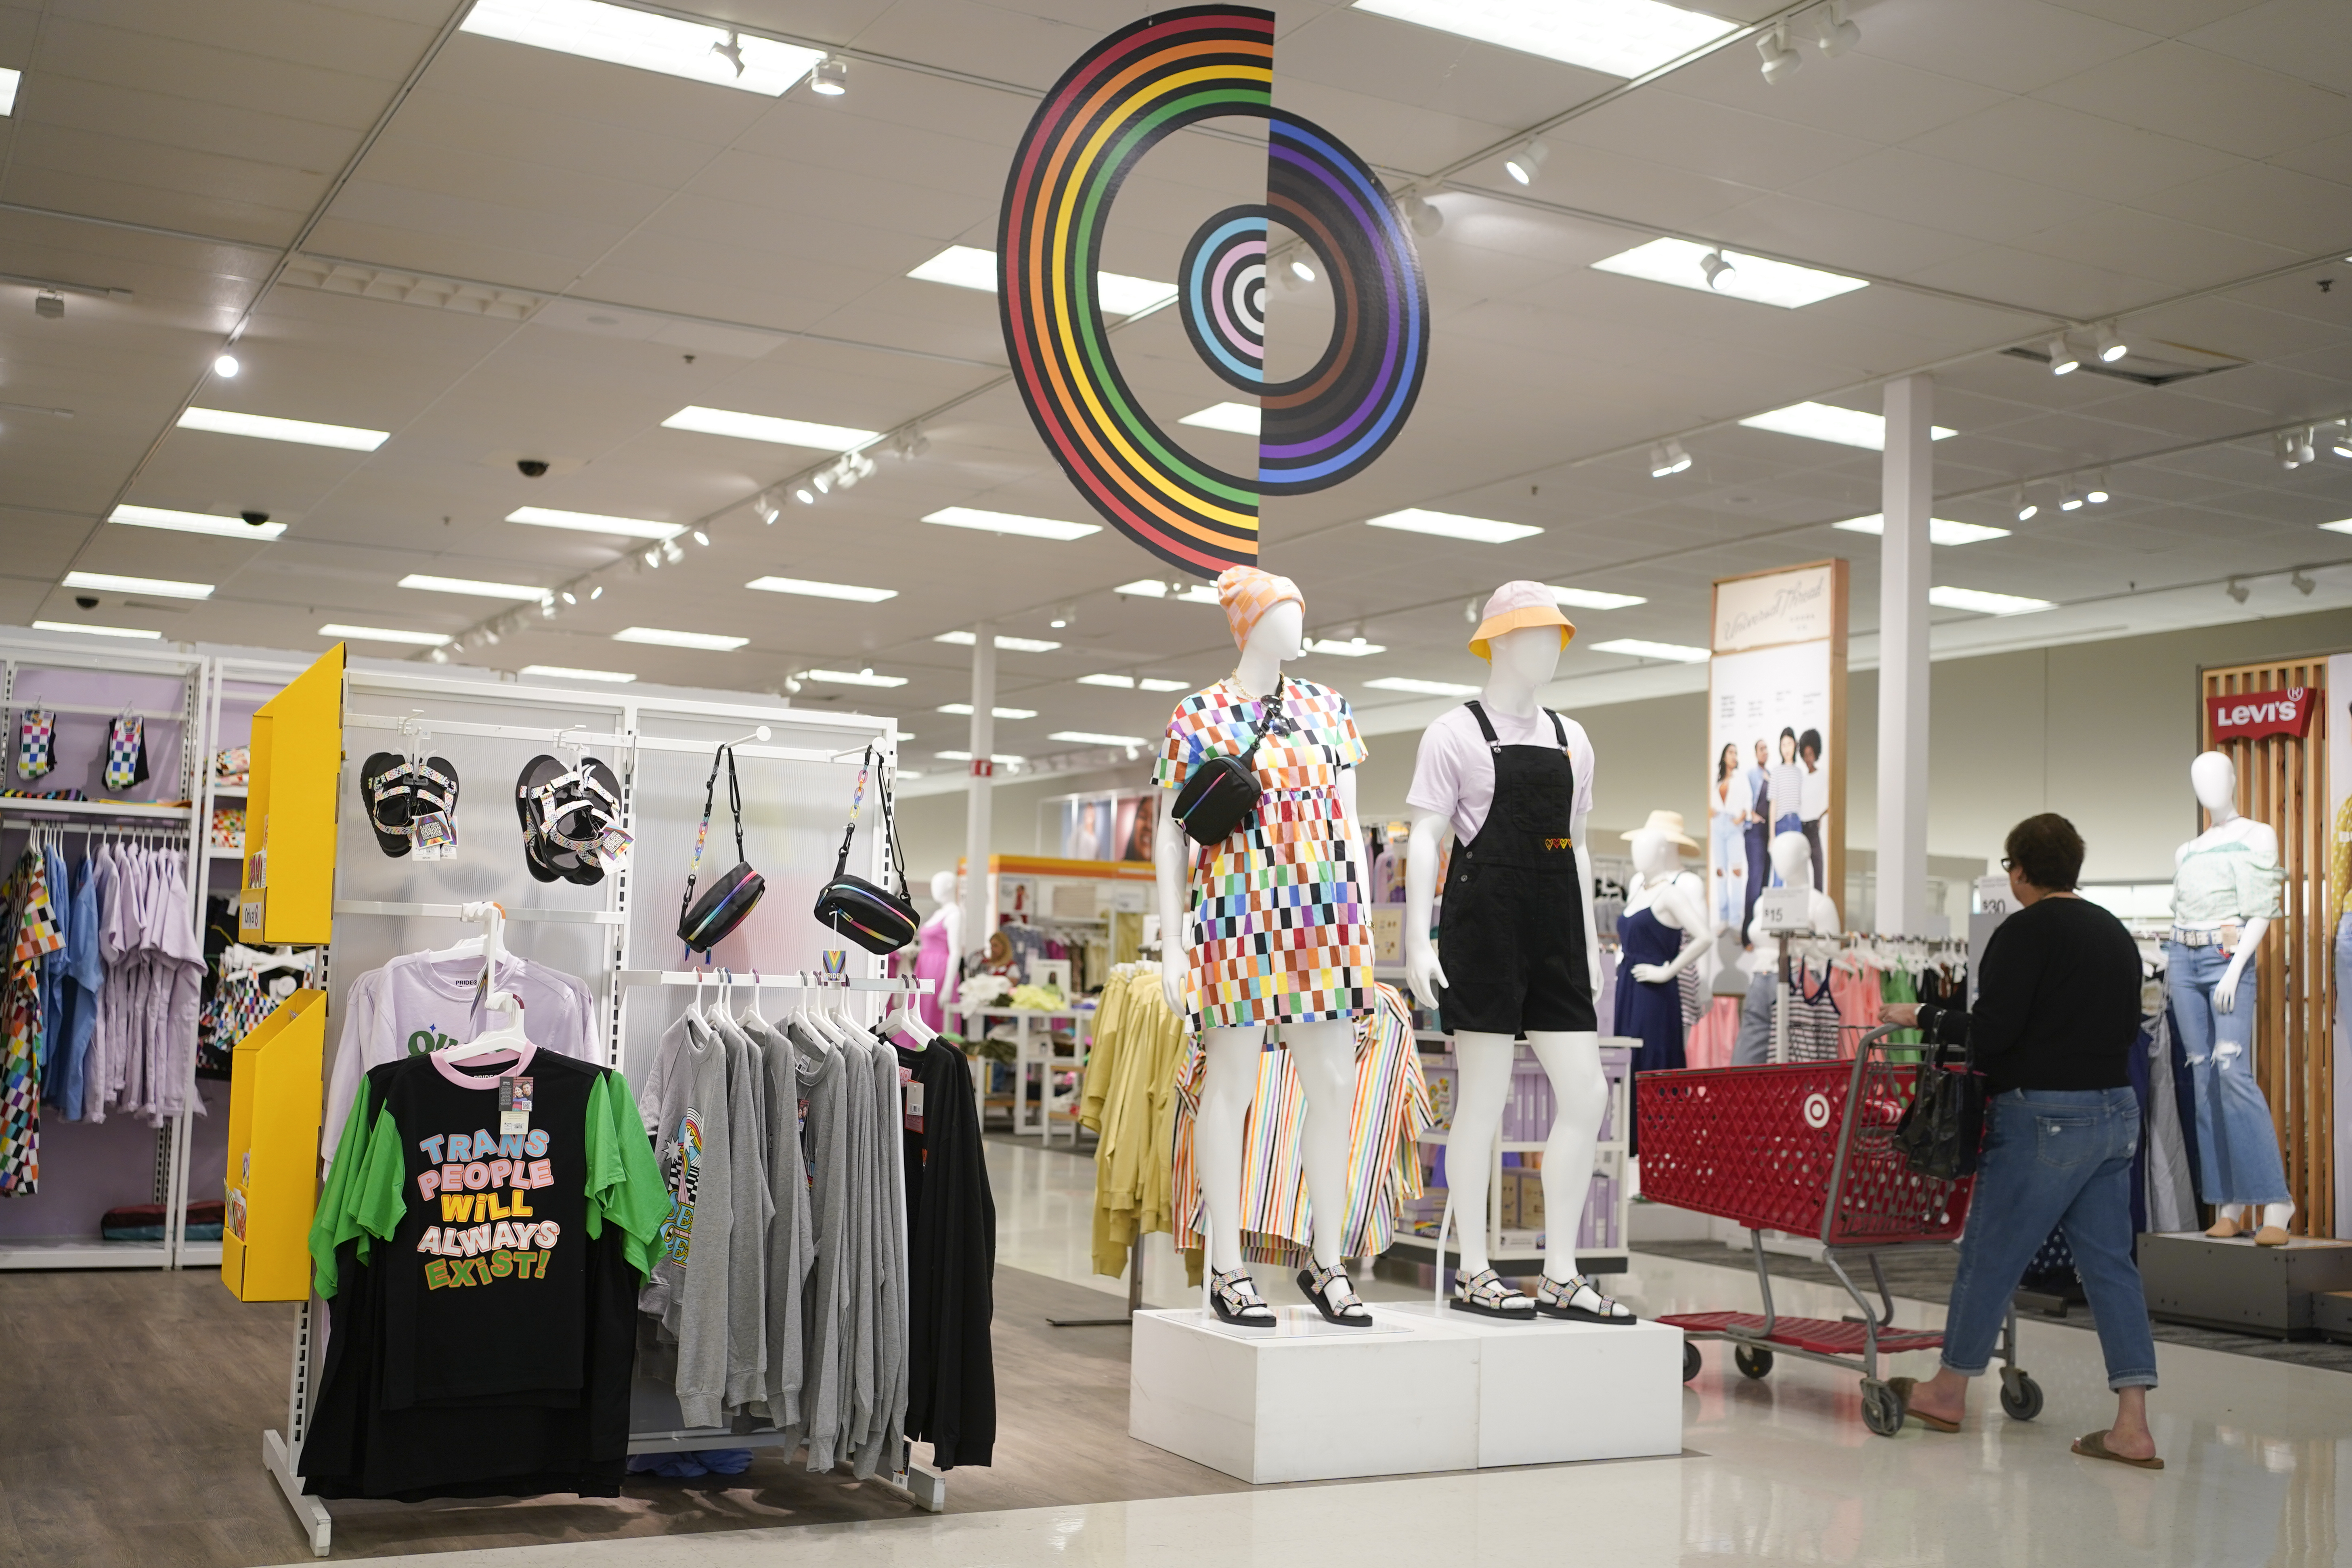 hebzuchtig kleuring Behoefte aan Target becomes latest company to suffer backlash for LGBTQ+ support, pulls  some Pride month clothing - The Boston Globe